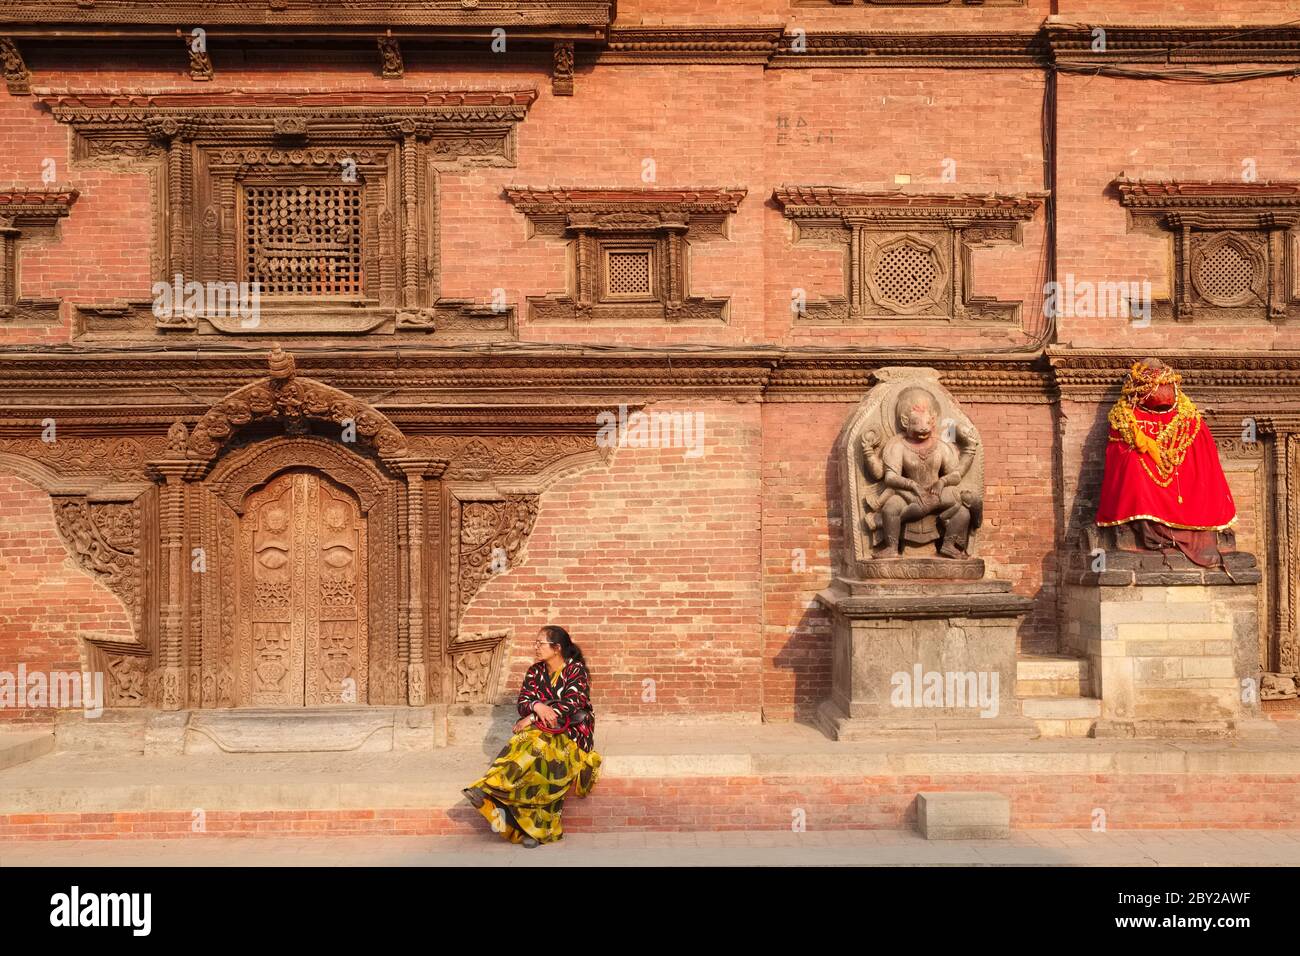 A woman sits in front of the royal palace, Durbar Square, Patan (Lalitpur), Nepal, near a red-clothed Hanuman statue (r) & a frieze of Bhairav (Shiva) Stock Photo